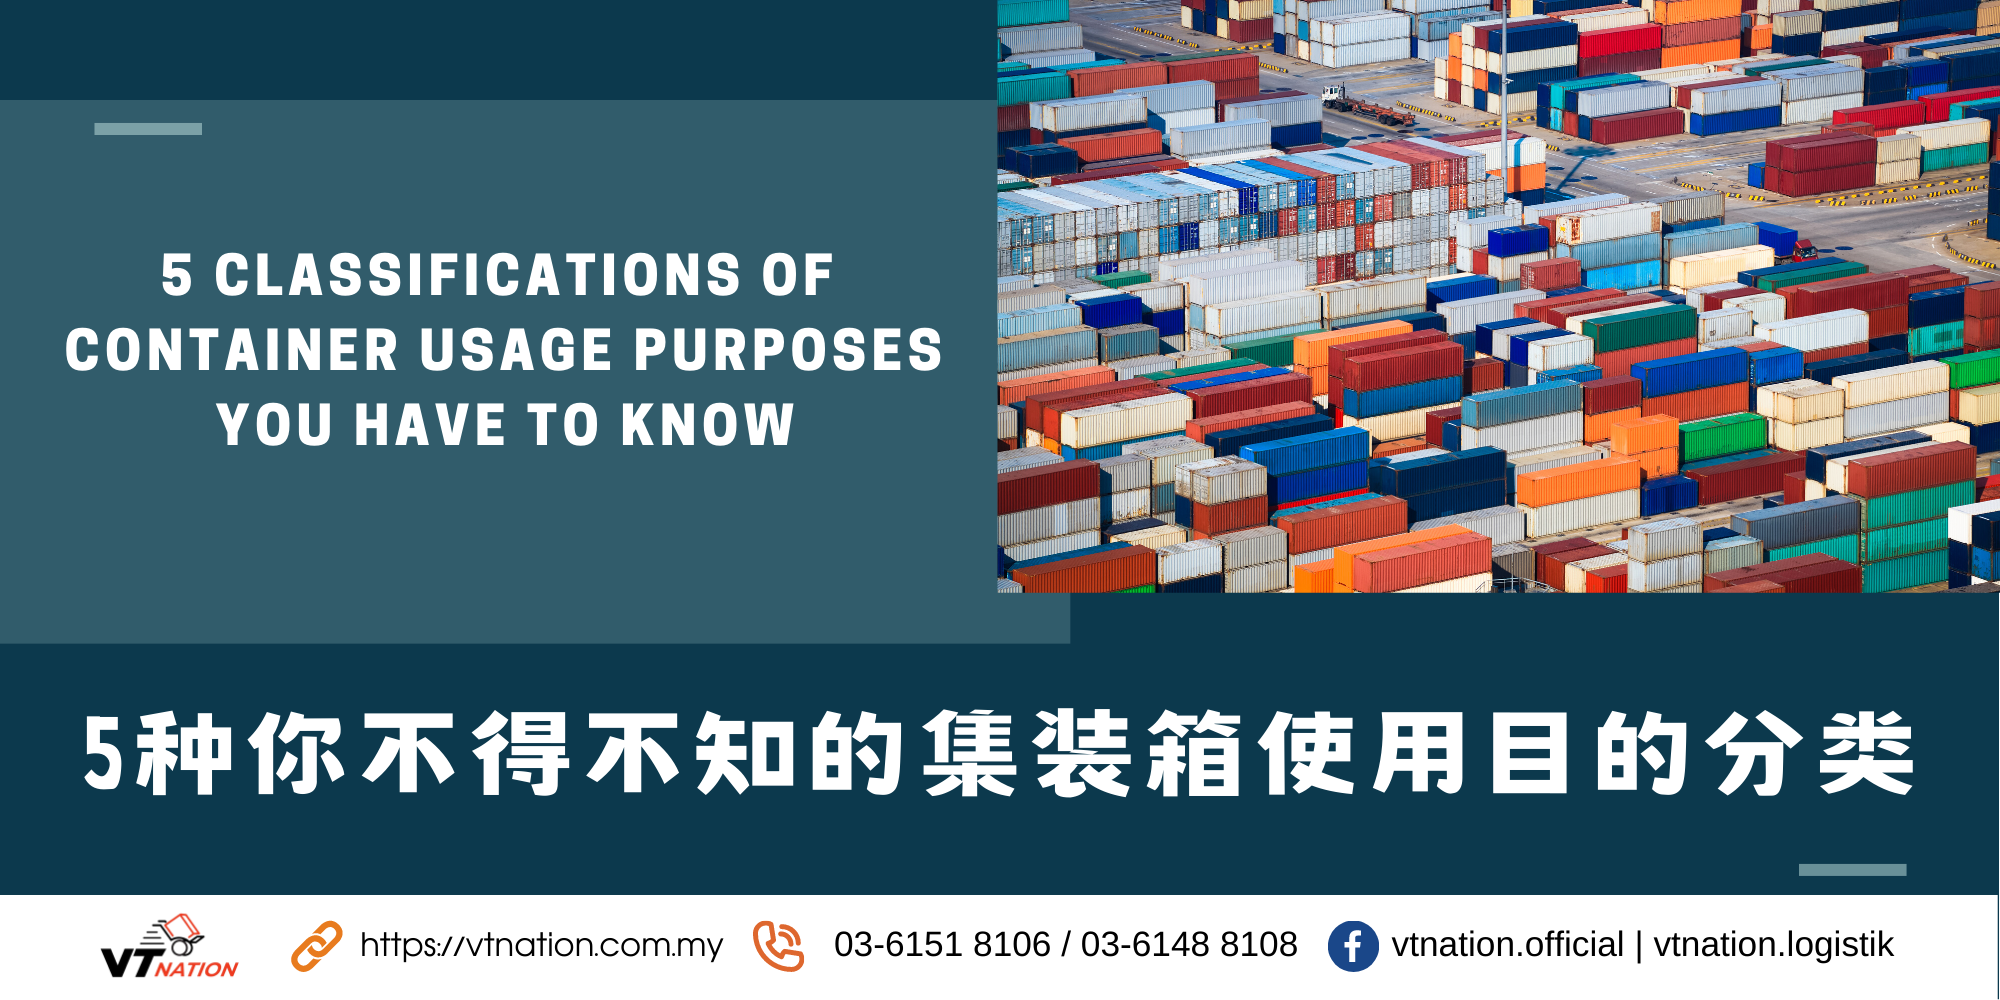 5 classifications of container usage purposes you have to know